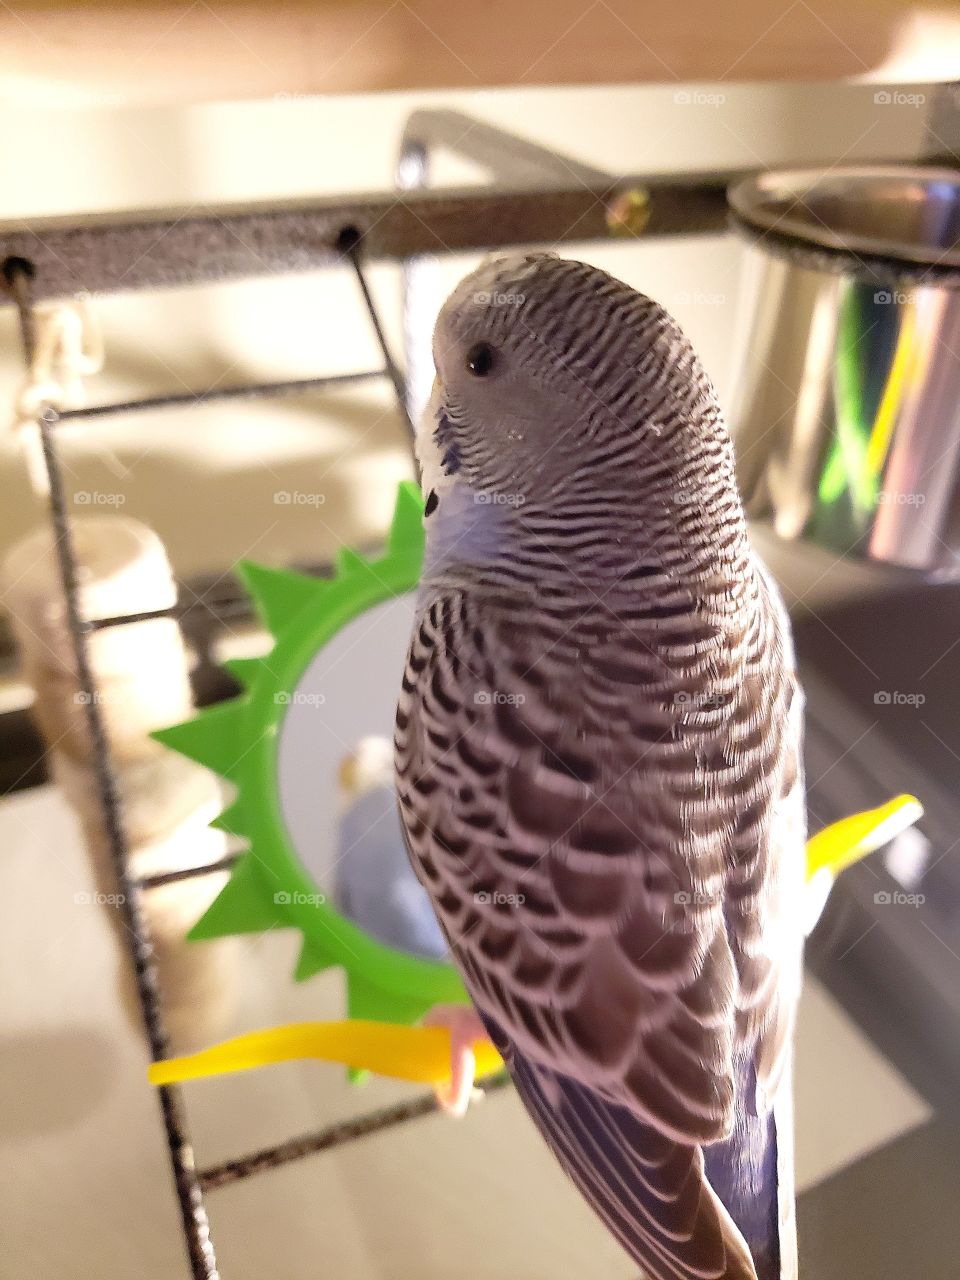 Budgie reflecting on image in mirror.